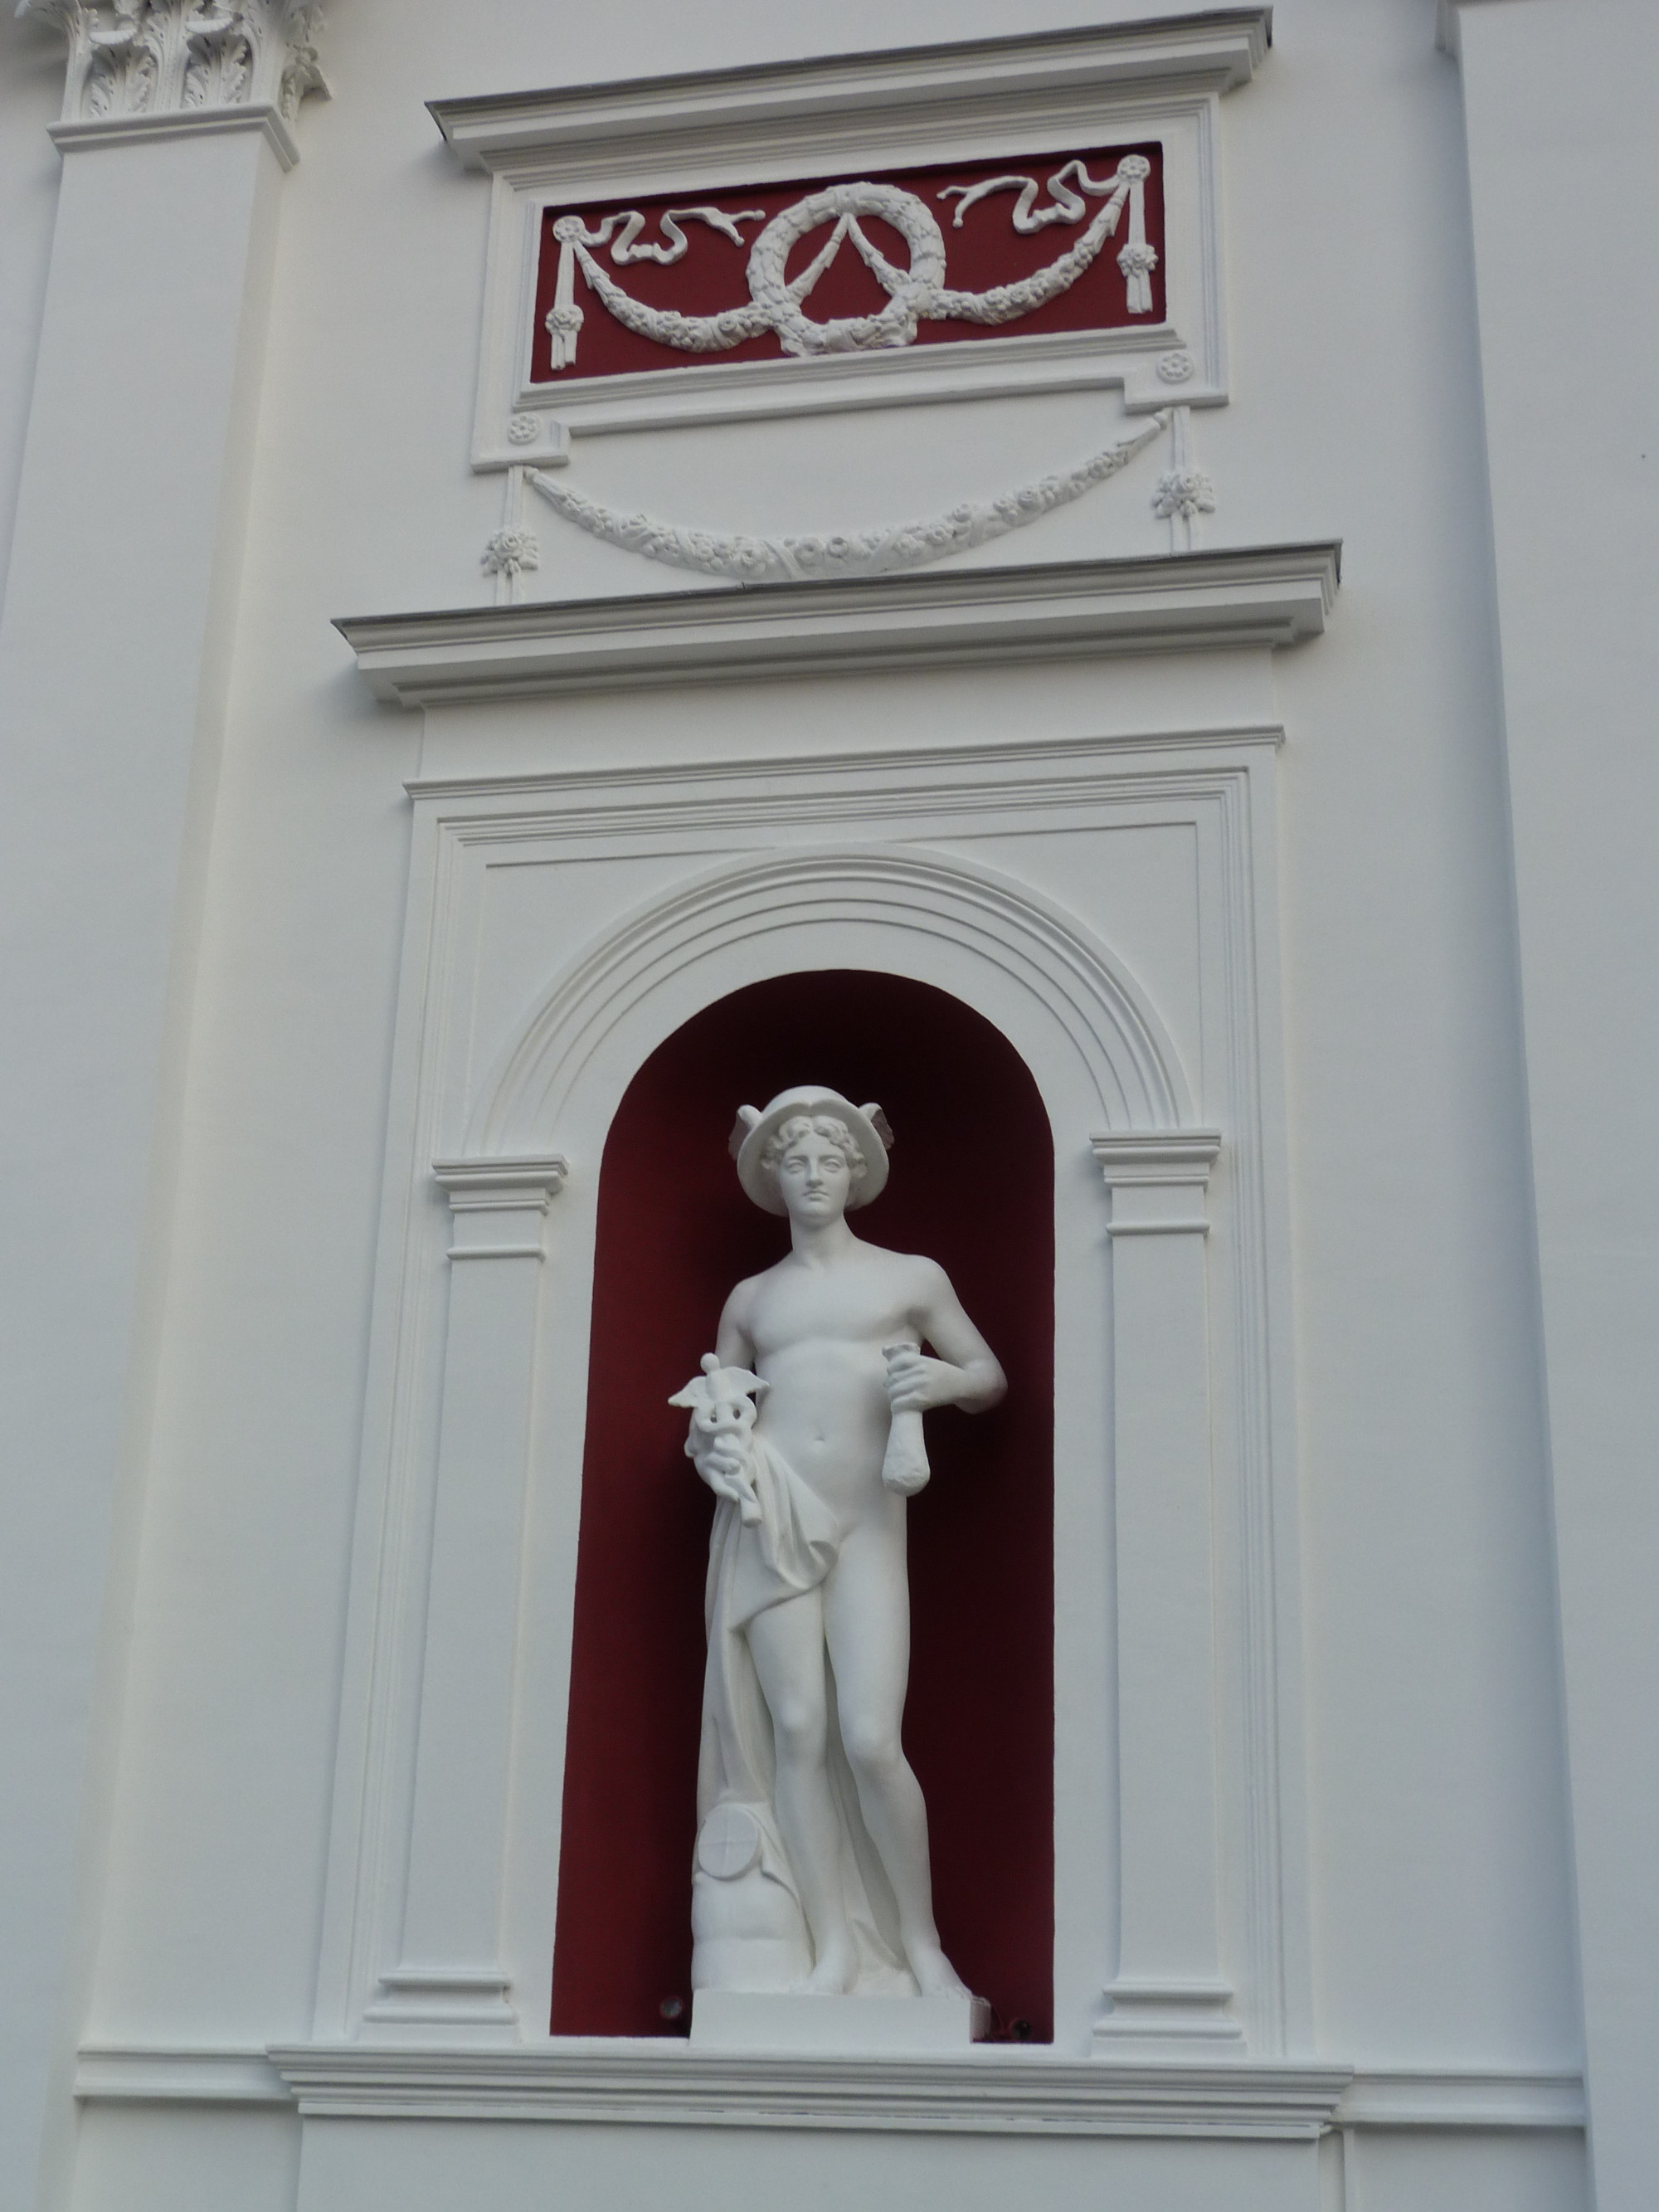 Antique Statue Of Hermes At The City Hall Of Odessa